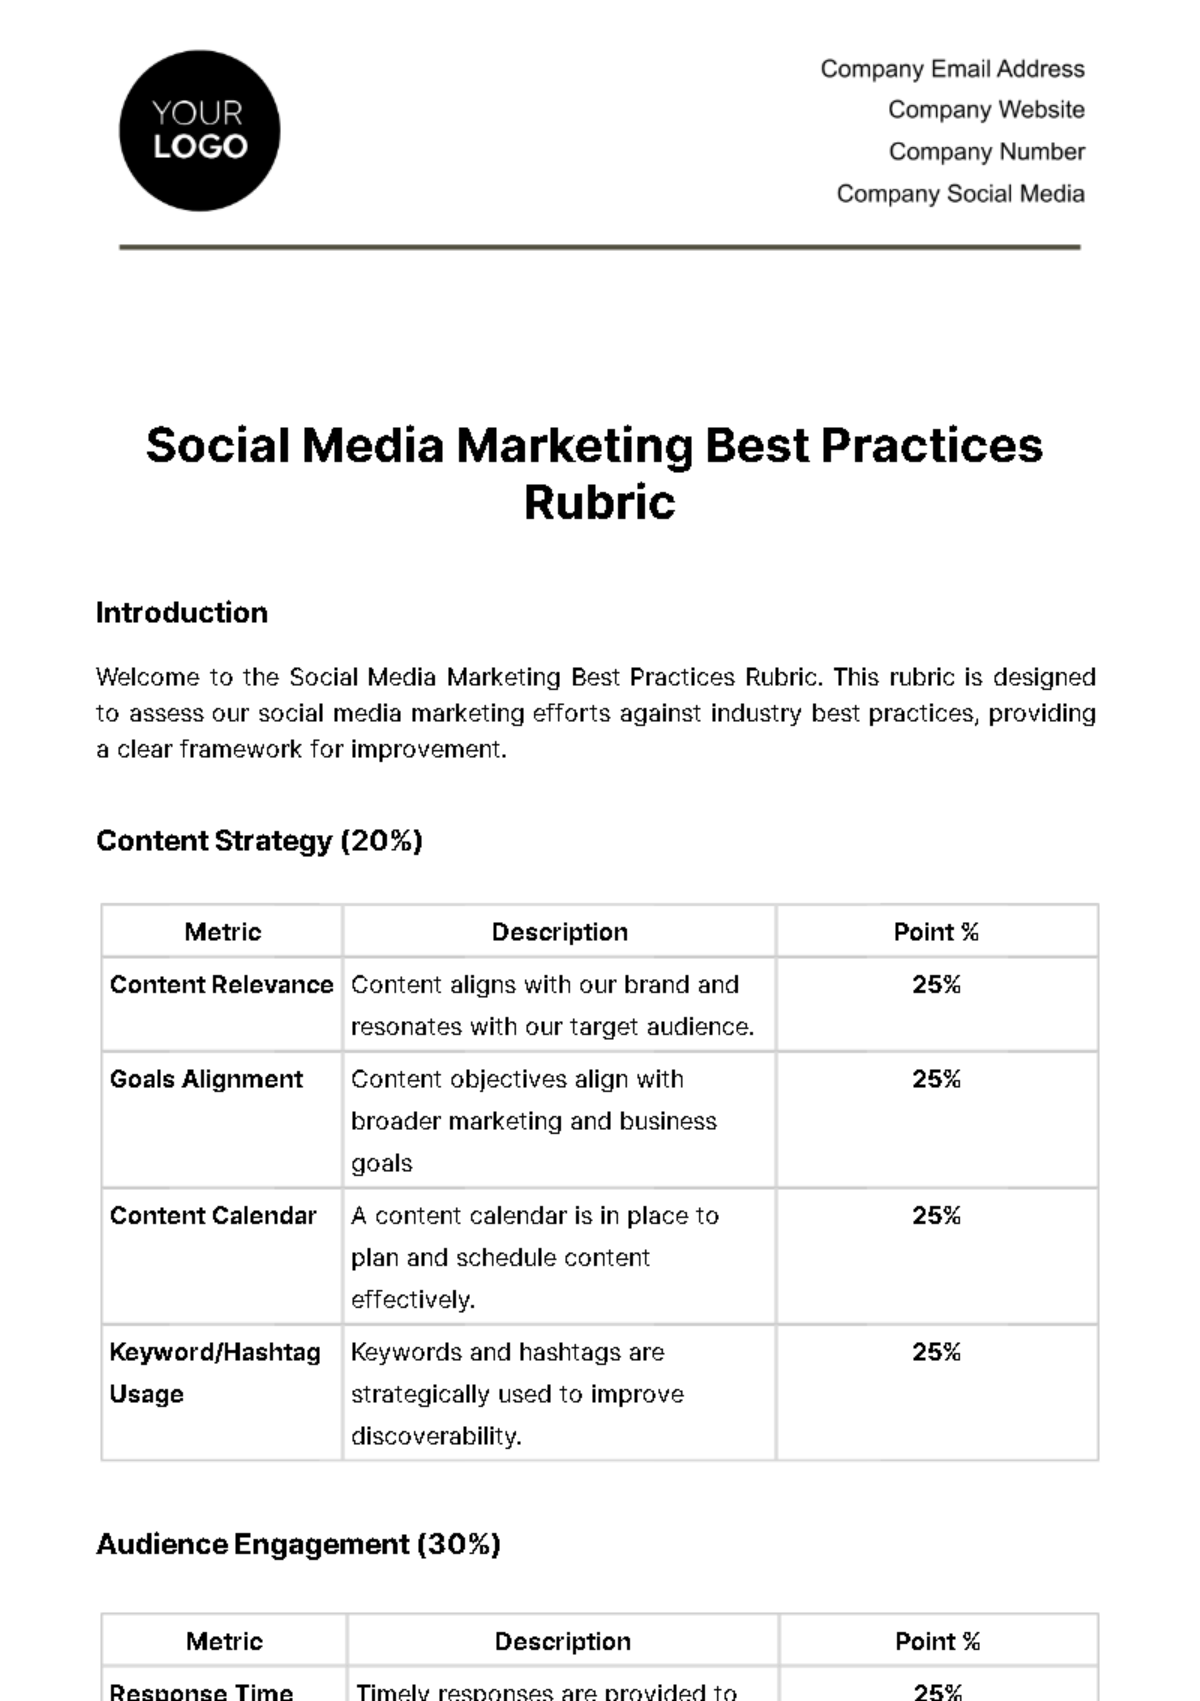 Free Social Media Marketing Best Practices Rubric Template